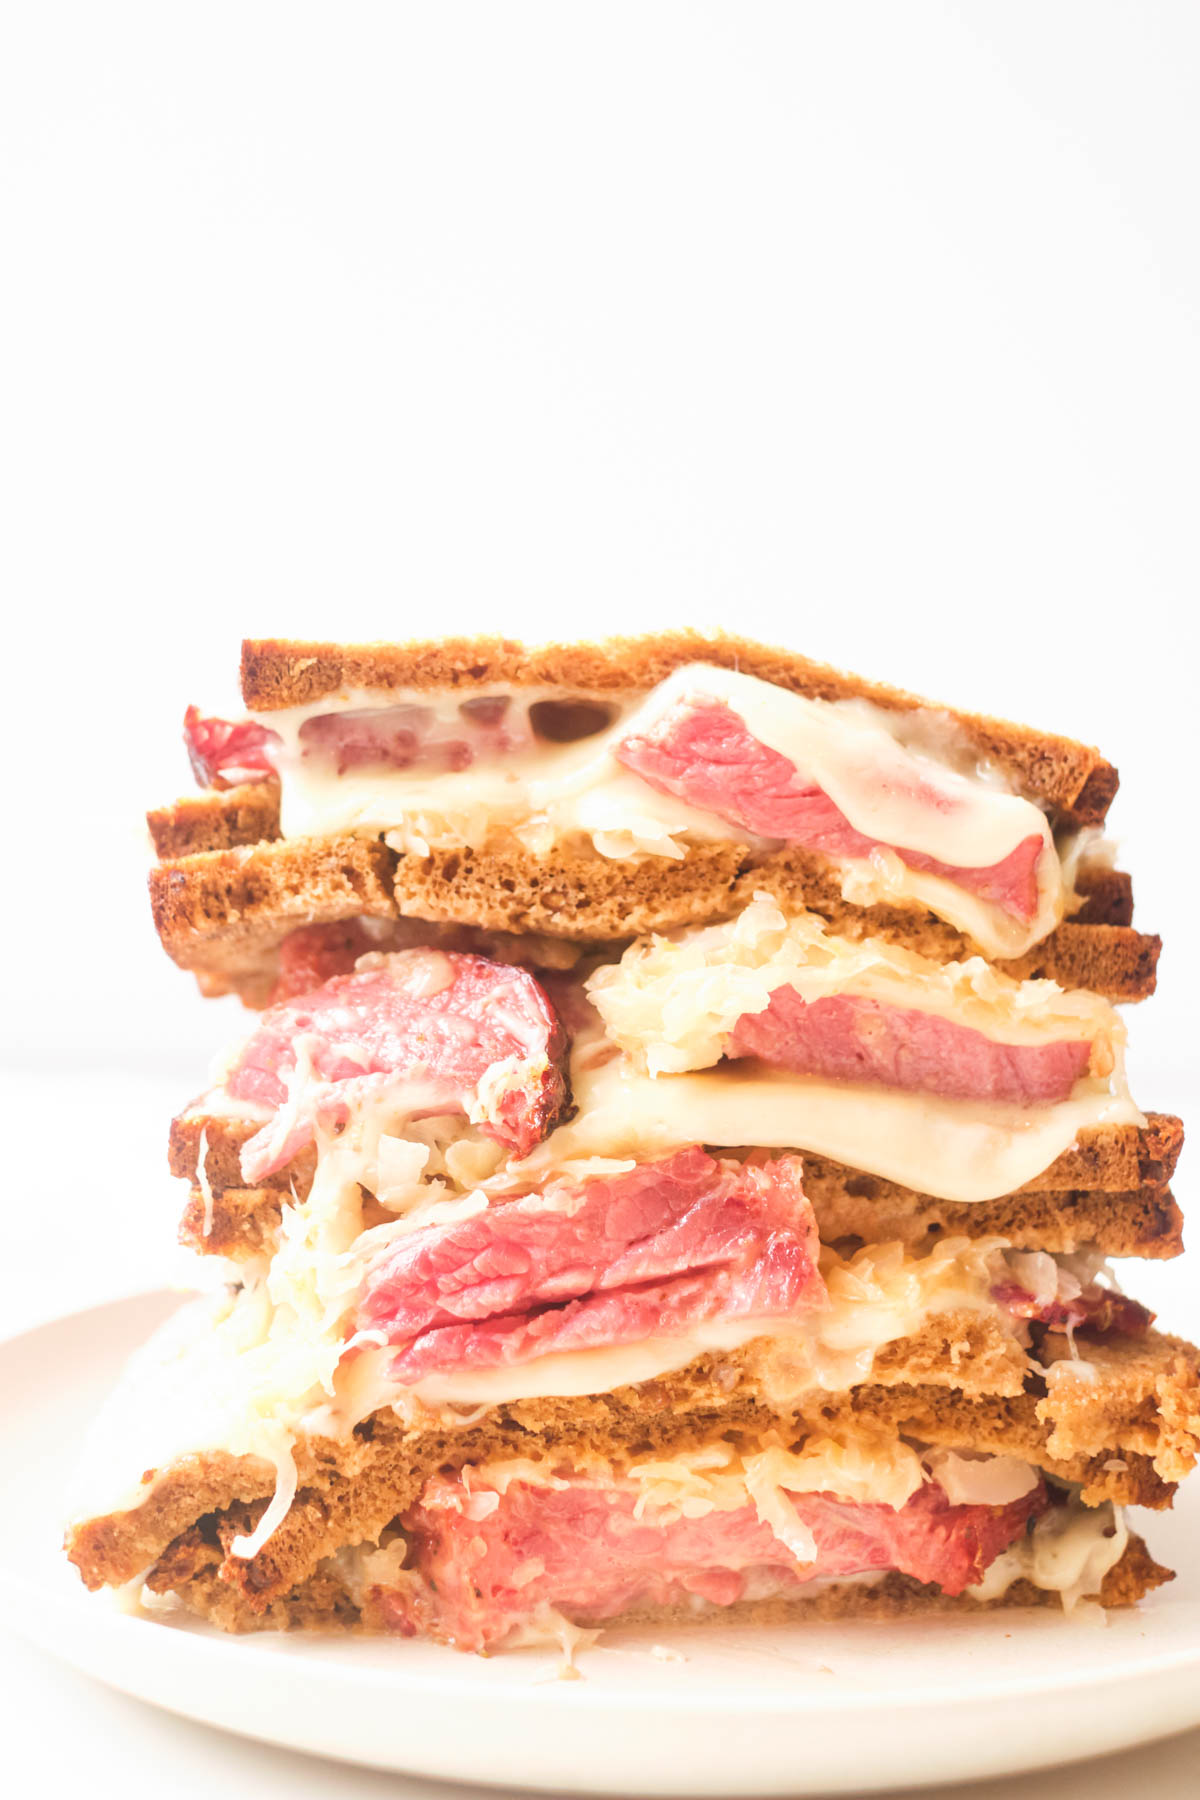 close up view of the finished air fryer reuben sandwich recipe